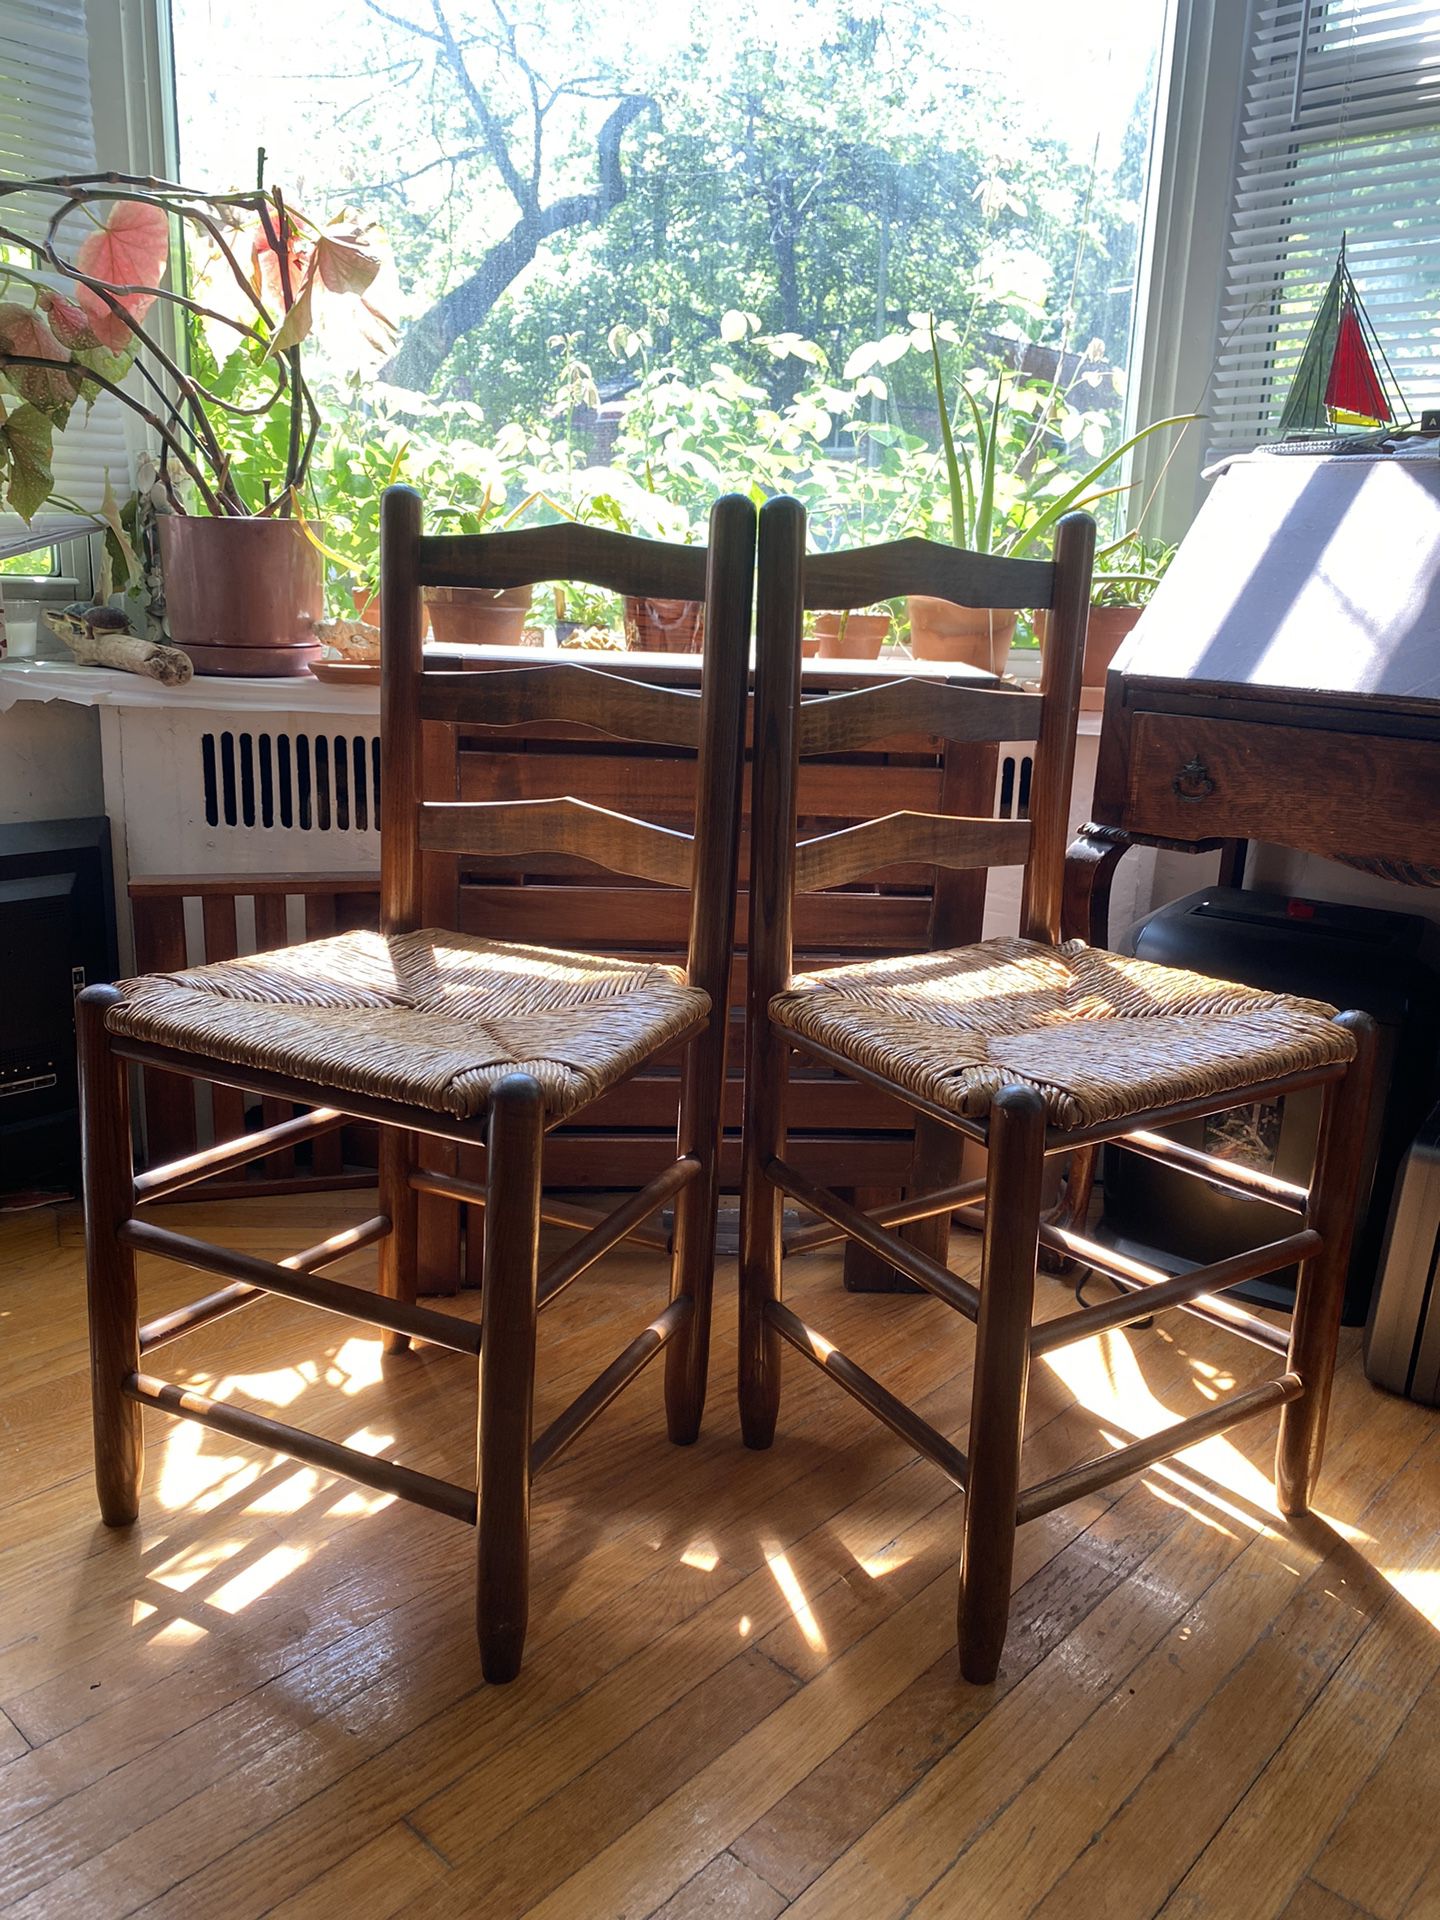 2 Donie Chair Company, Inc. Cathedral Top Ladder Back Chairs With Rush seat